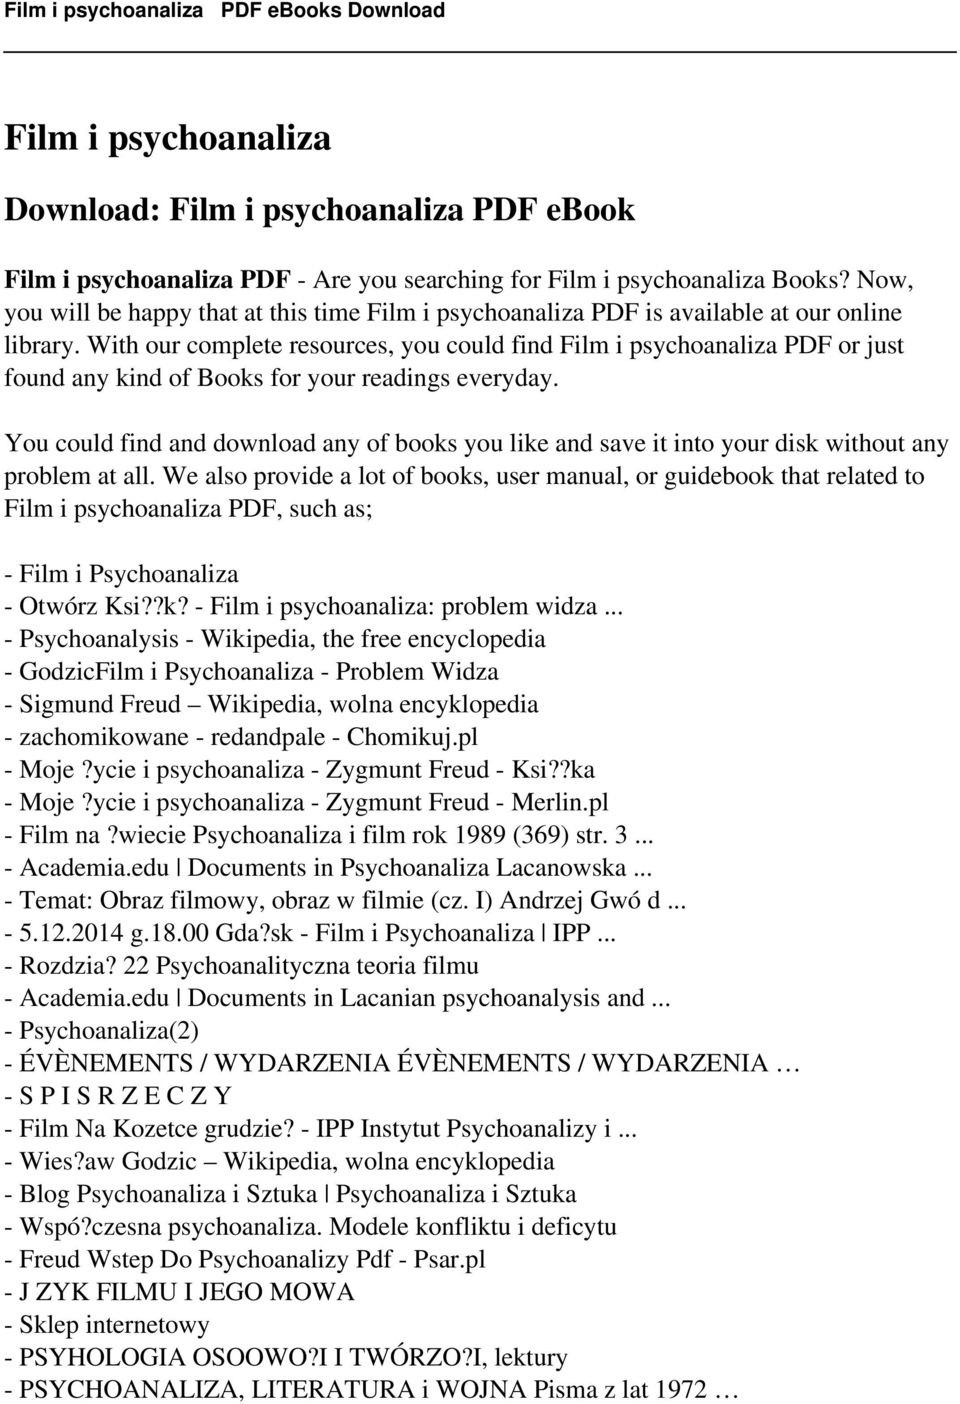 With our complete resources, you could find Film i psychoanaliza PDF or just found any kind of Books for your readings everyday.